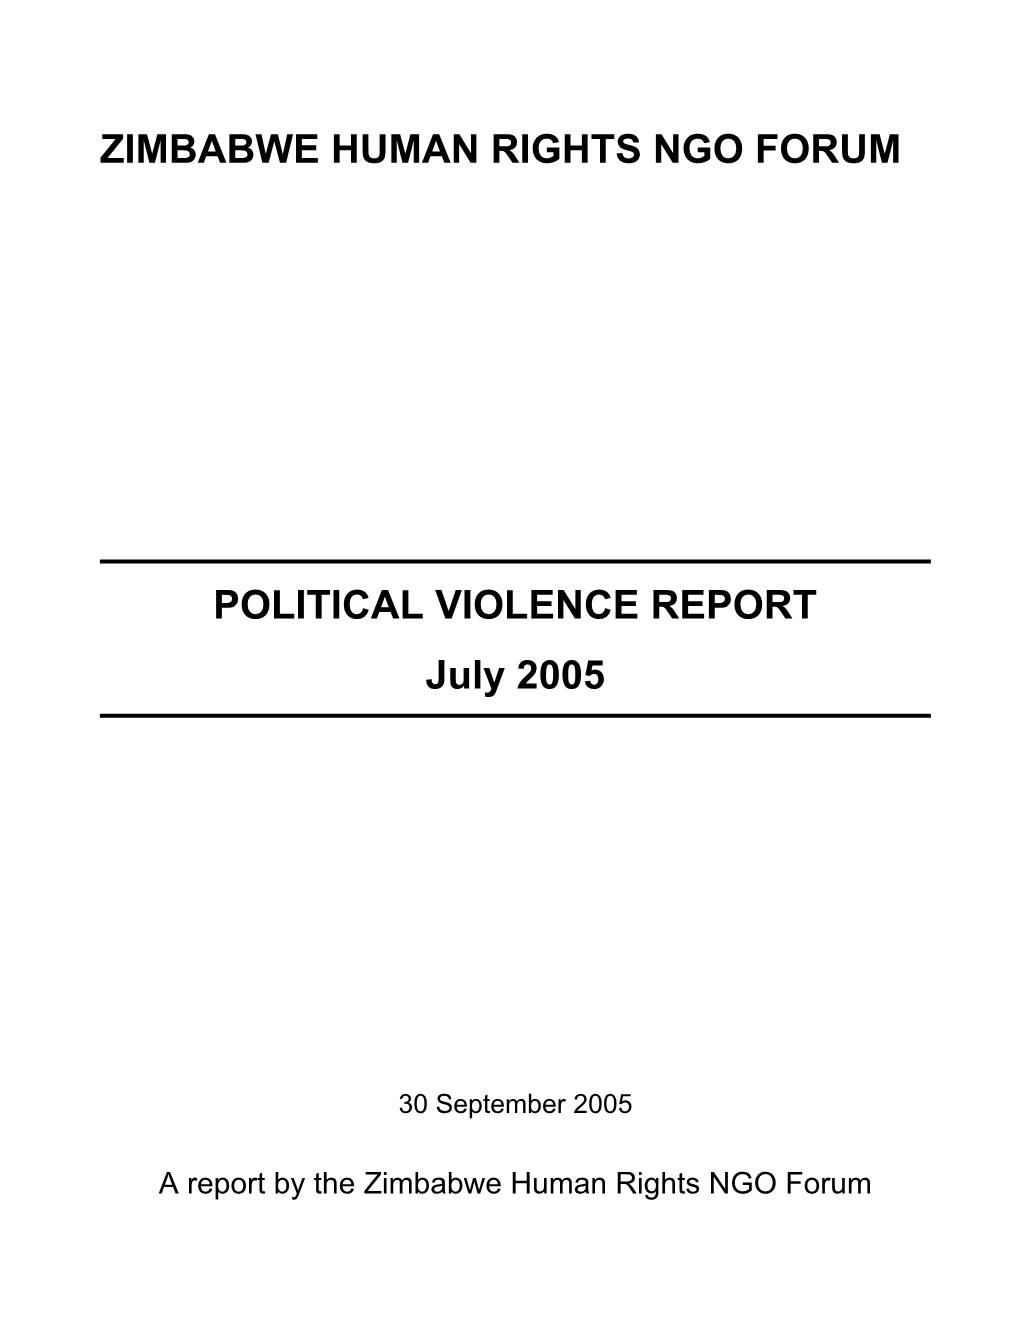 Monthly Political Violence Report